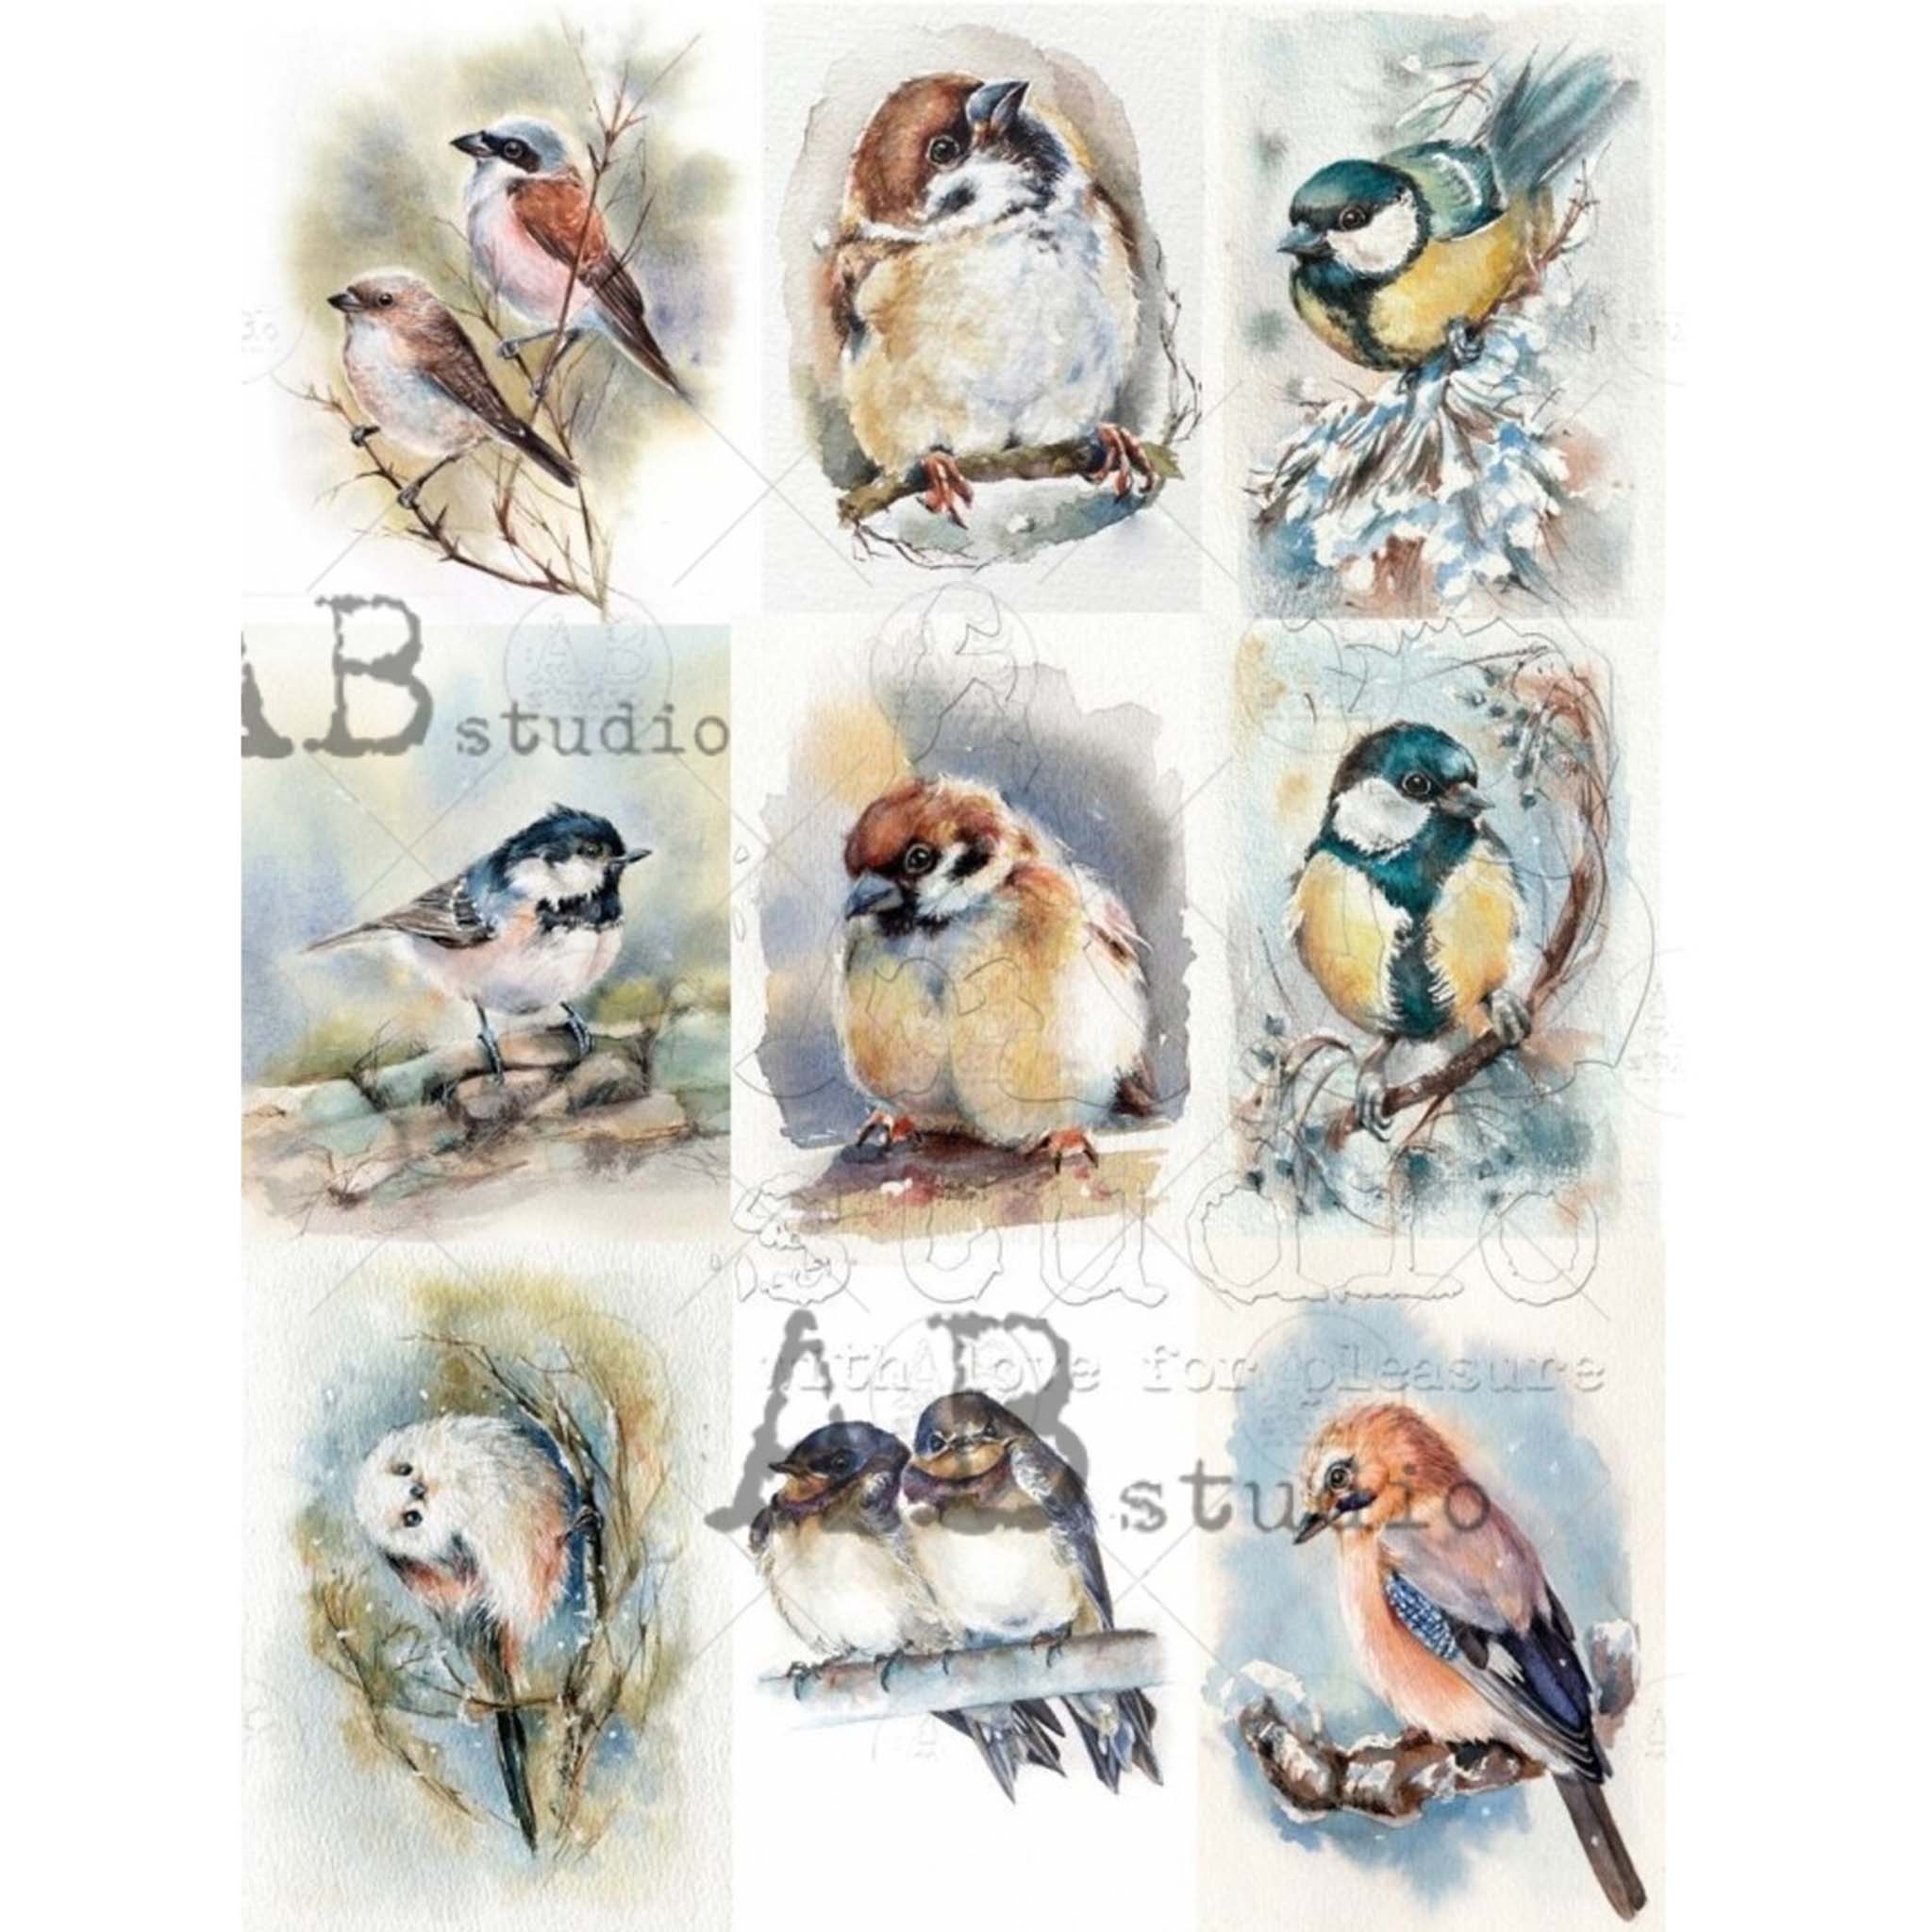 A4 rice paper design of  9 vibrant watercolor bird images against a white background.